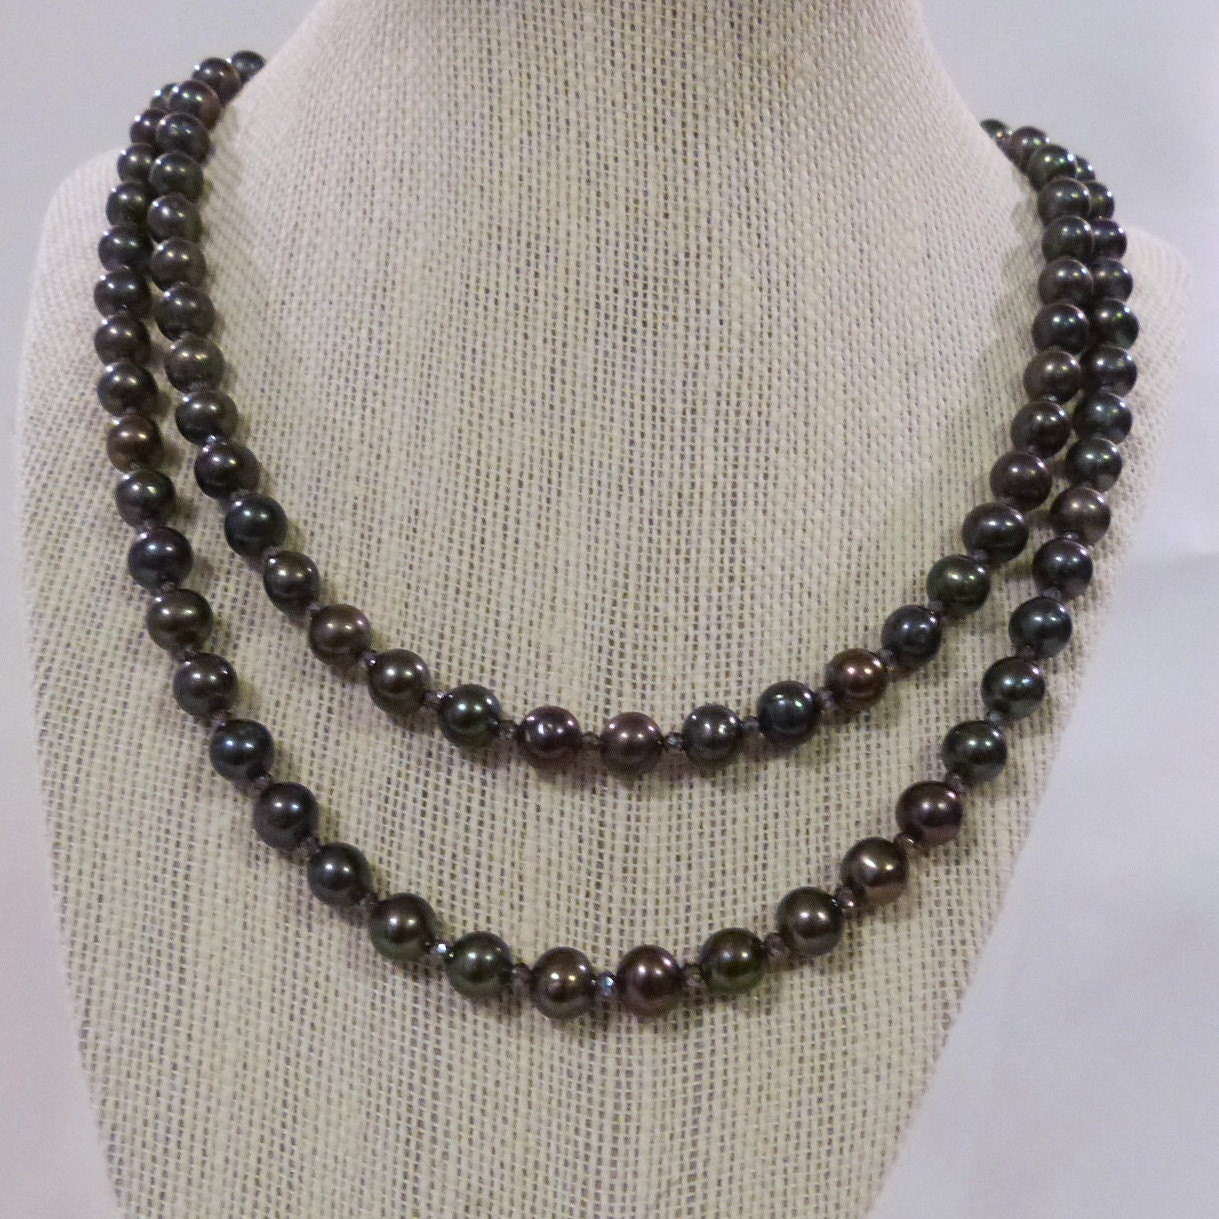 Double Strand Dark Peacock Freshwater Pearl Necklace - Etsy